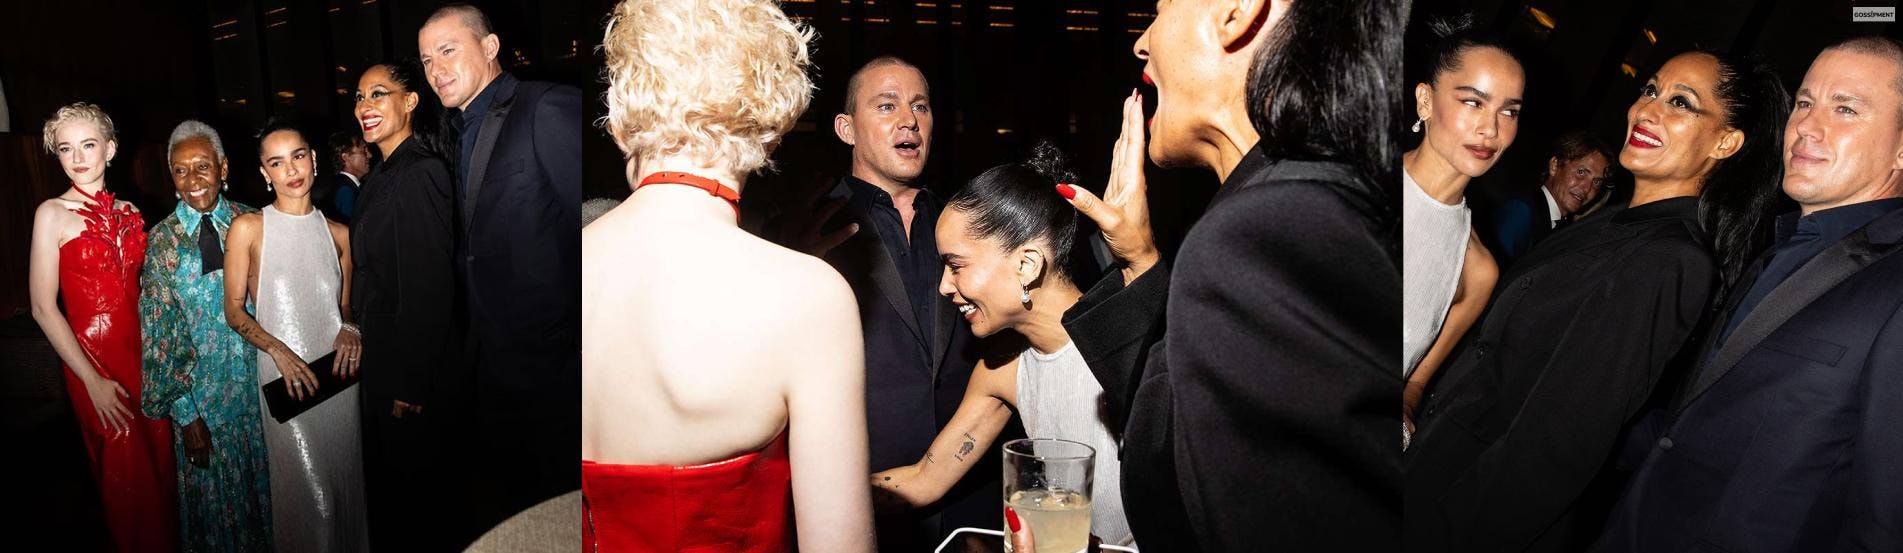 Cover Image for Channing Tatum And Zoe Kravitz Came Together For The Fundraiser Event: “Gorgeous Night”